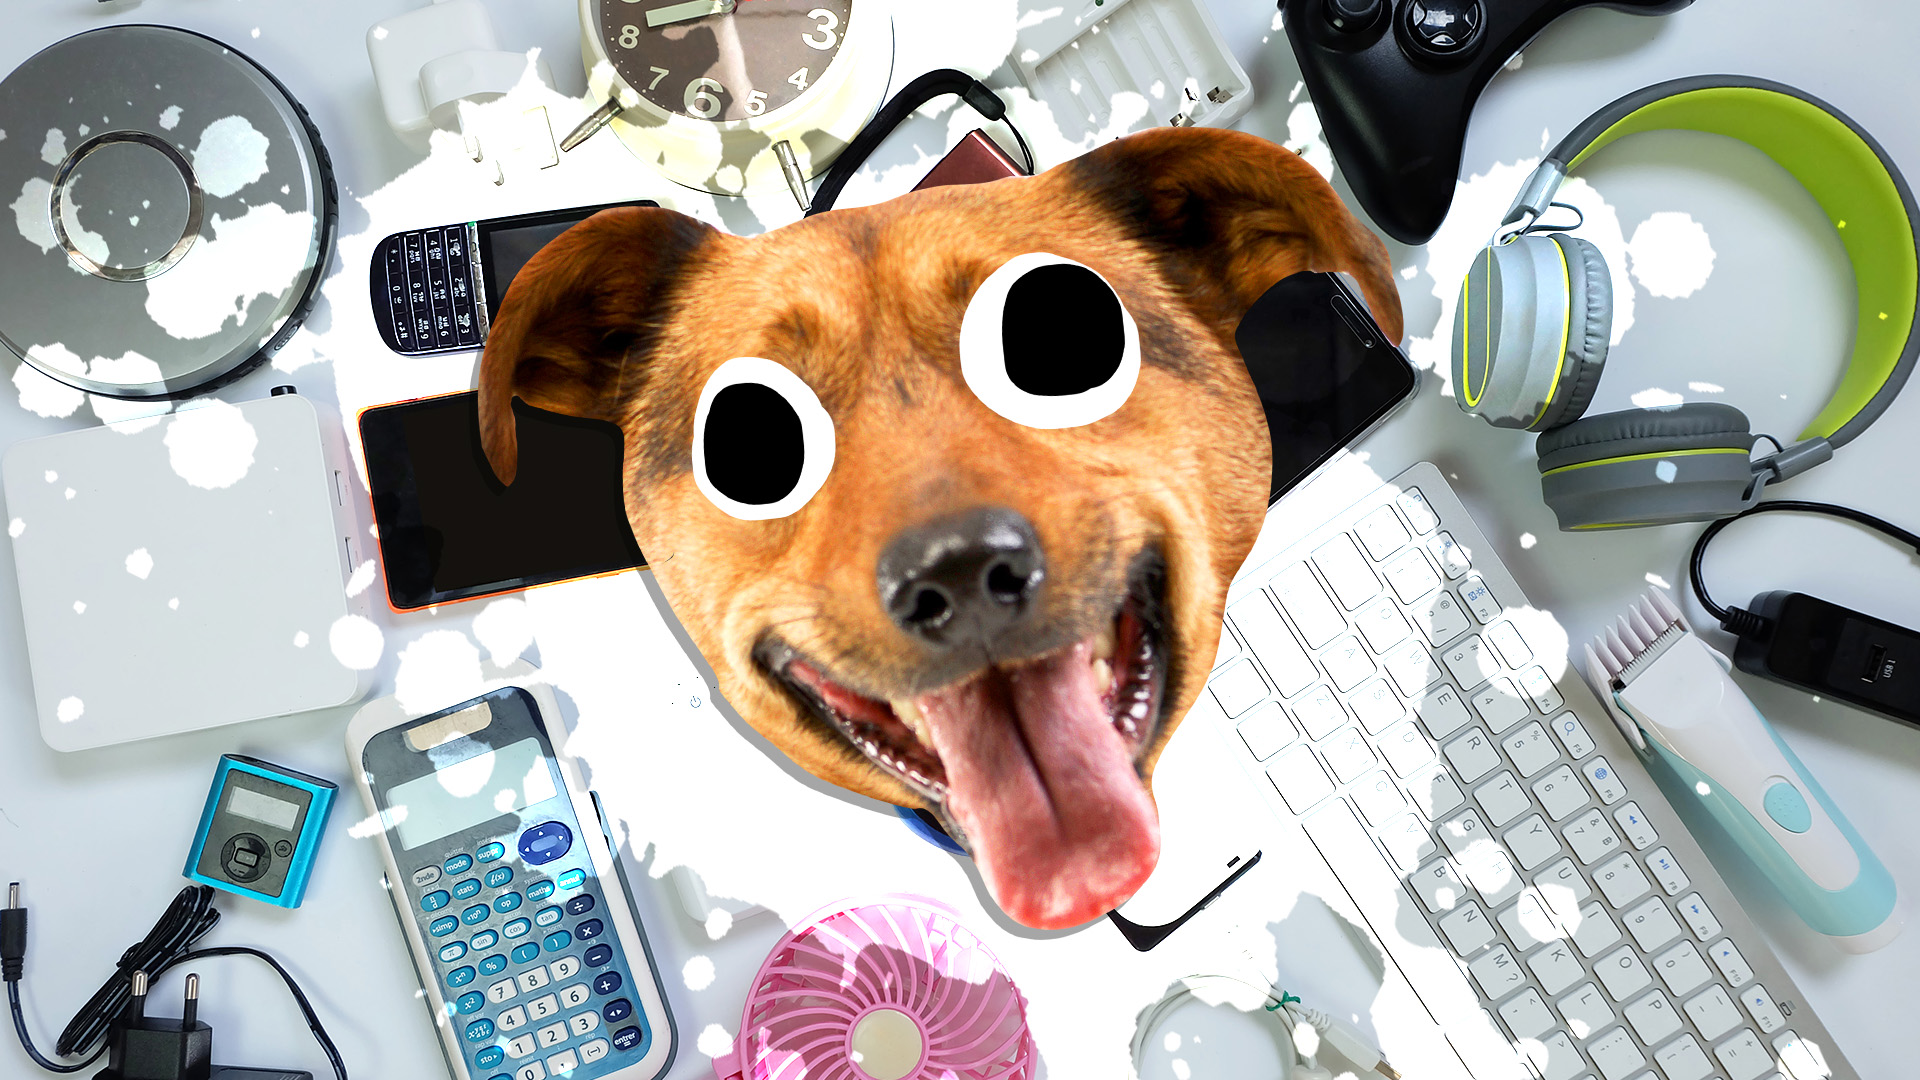 A dog surrounded by gadgets